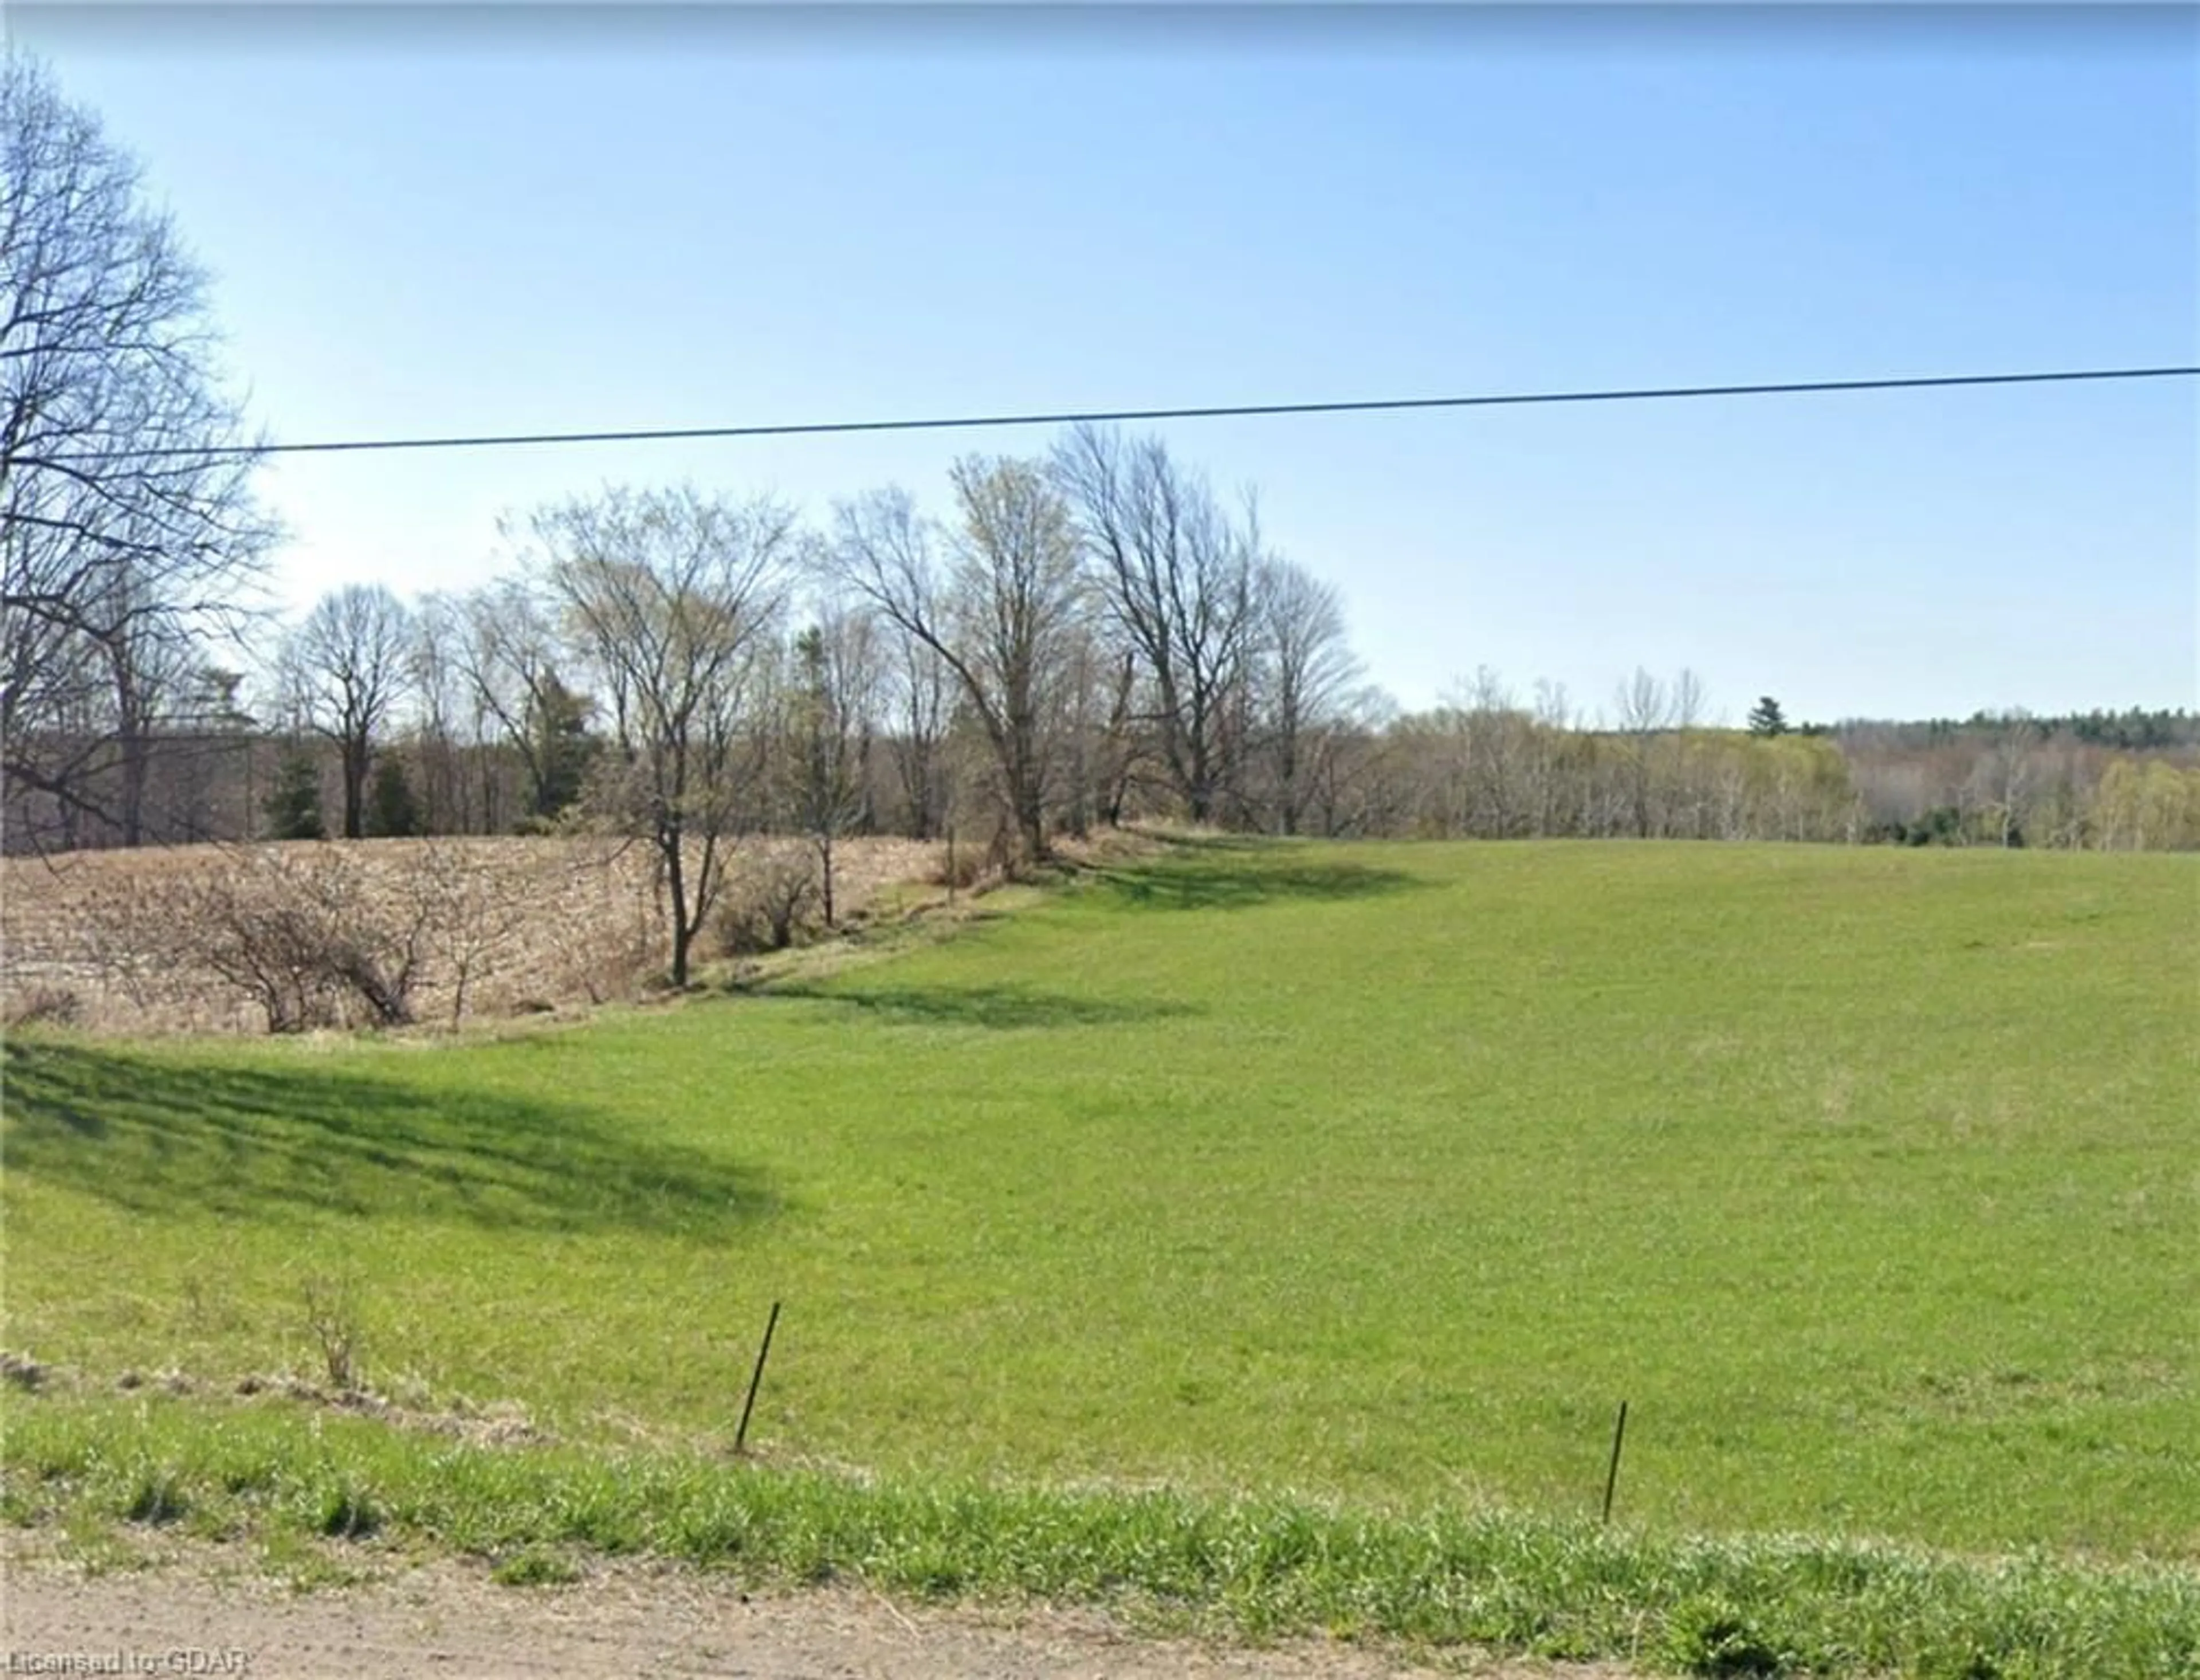 Fenced yard for 6671 County Rd 9, Clearview Ontario L0M 1G0